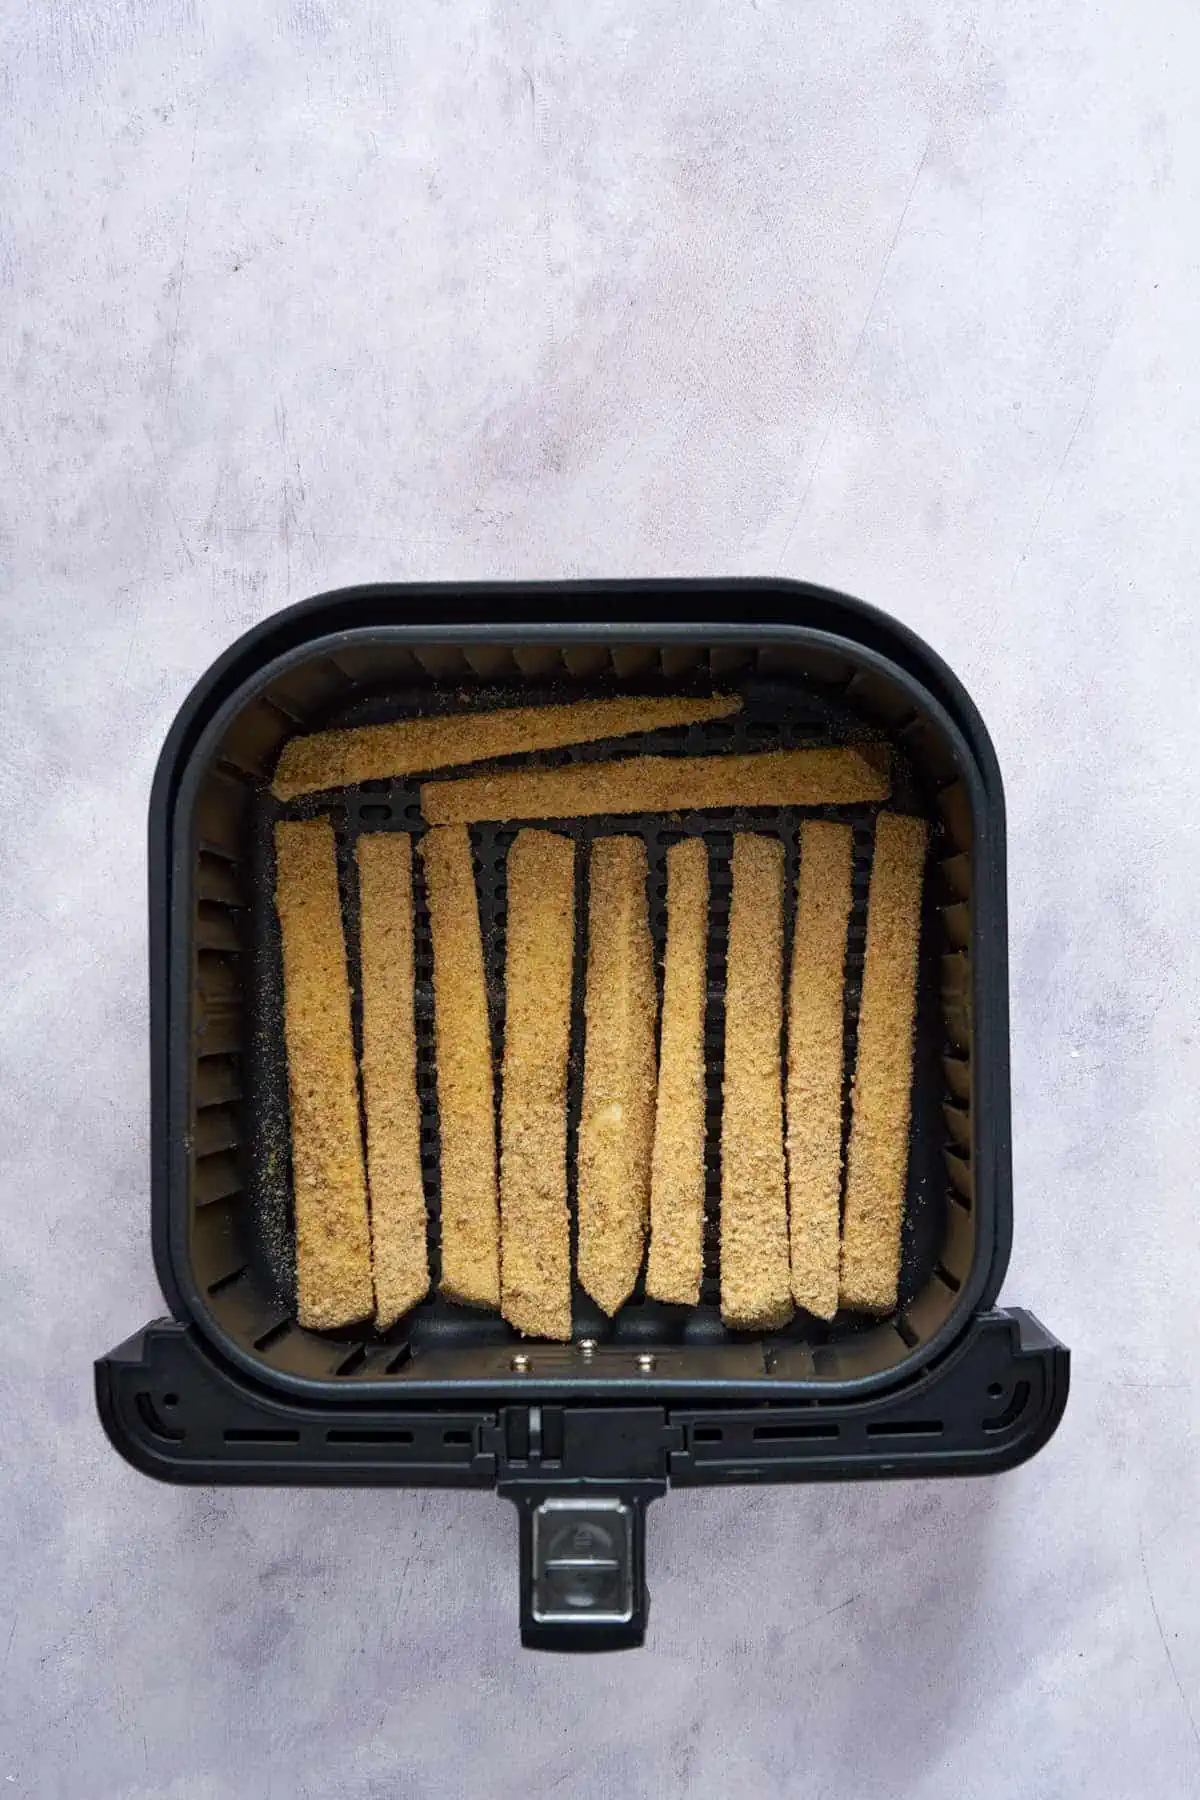 Coated eggplant sticks in the air fryer basket.